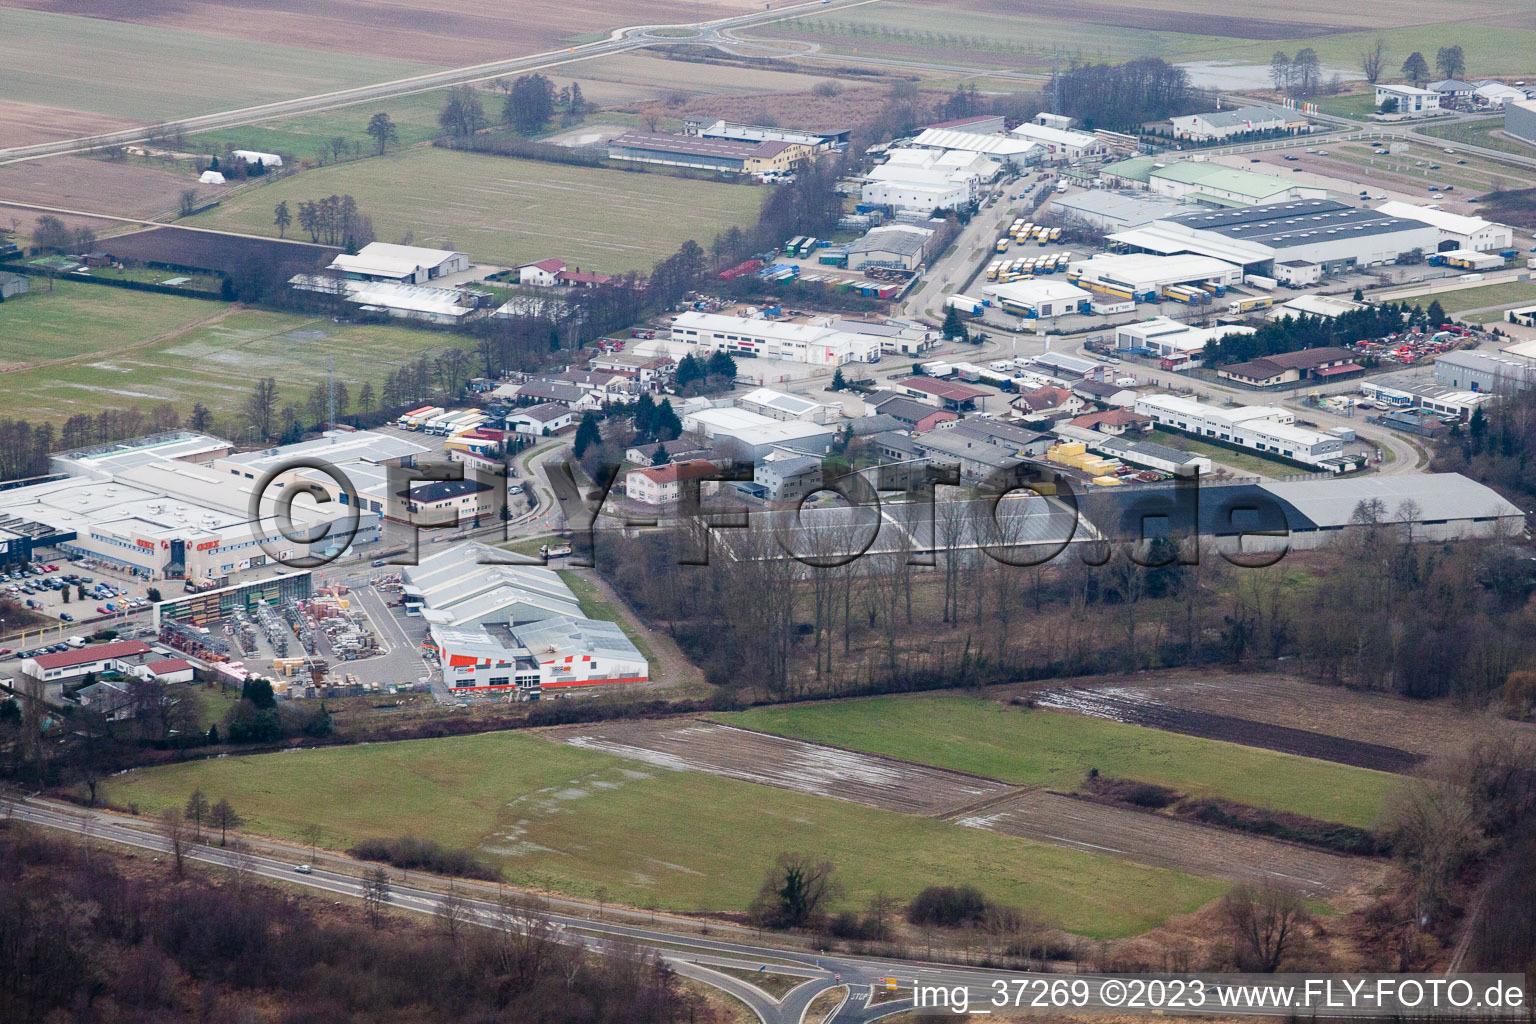 Horst industrial area in the district Minderslachen in Kandel in the state Rhineland-Palatinate, Germany from above